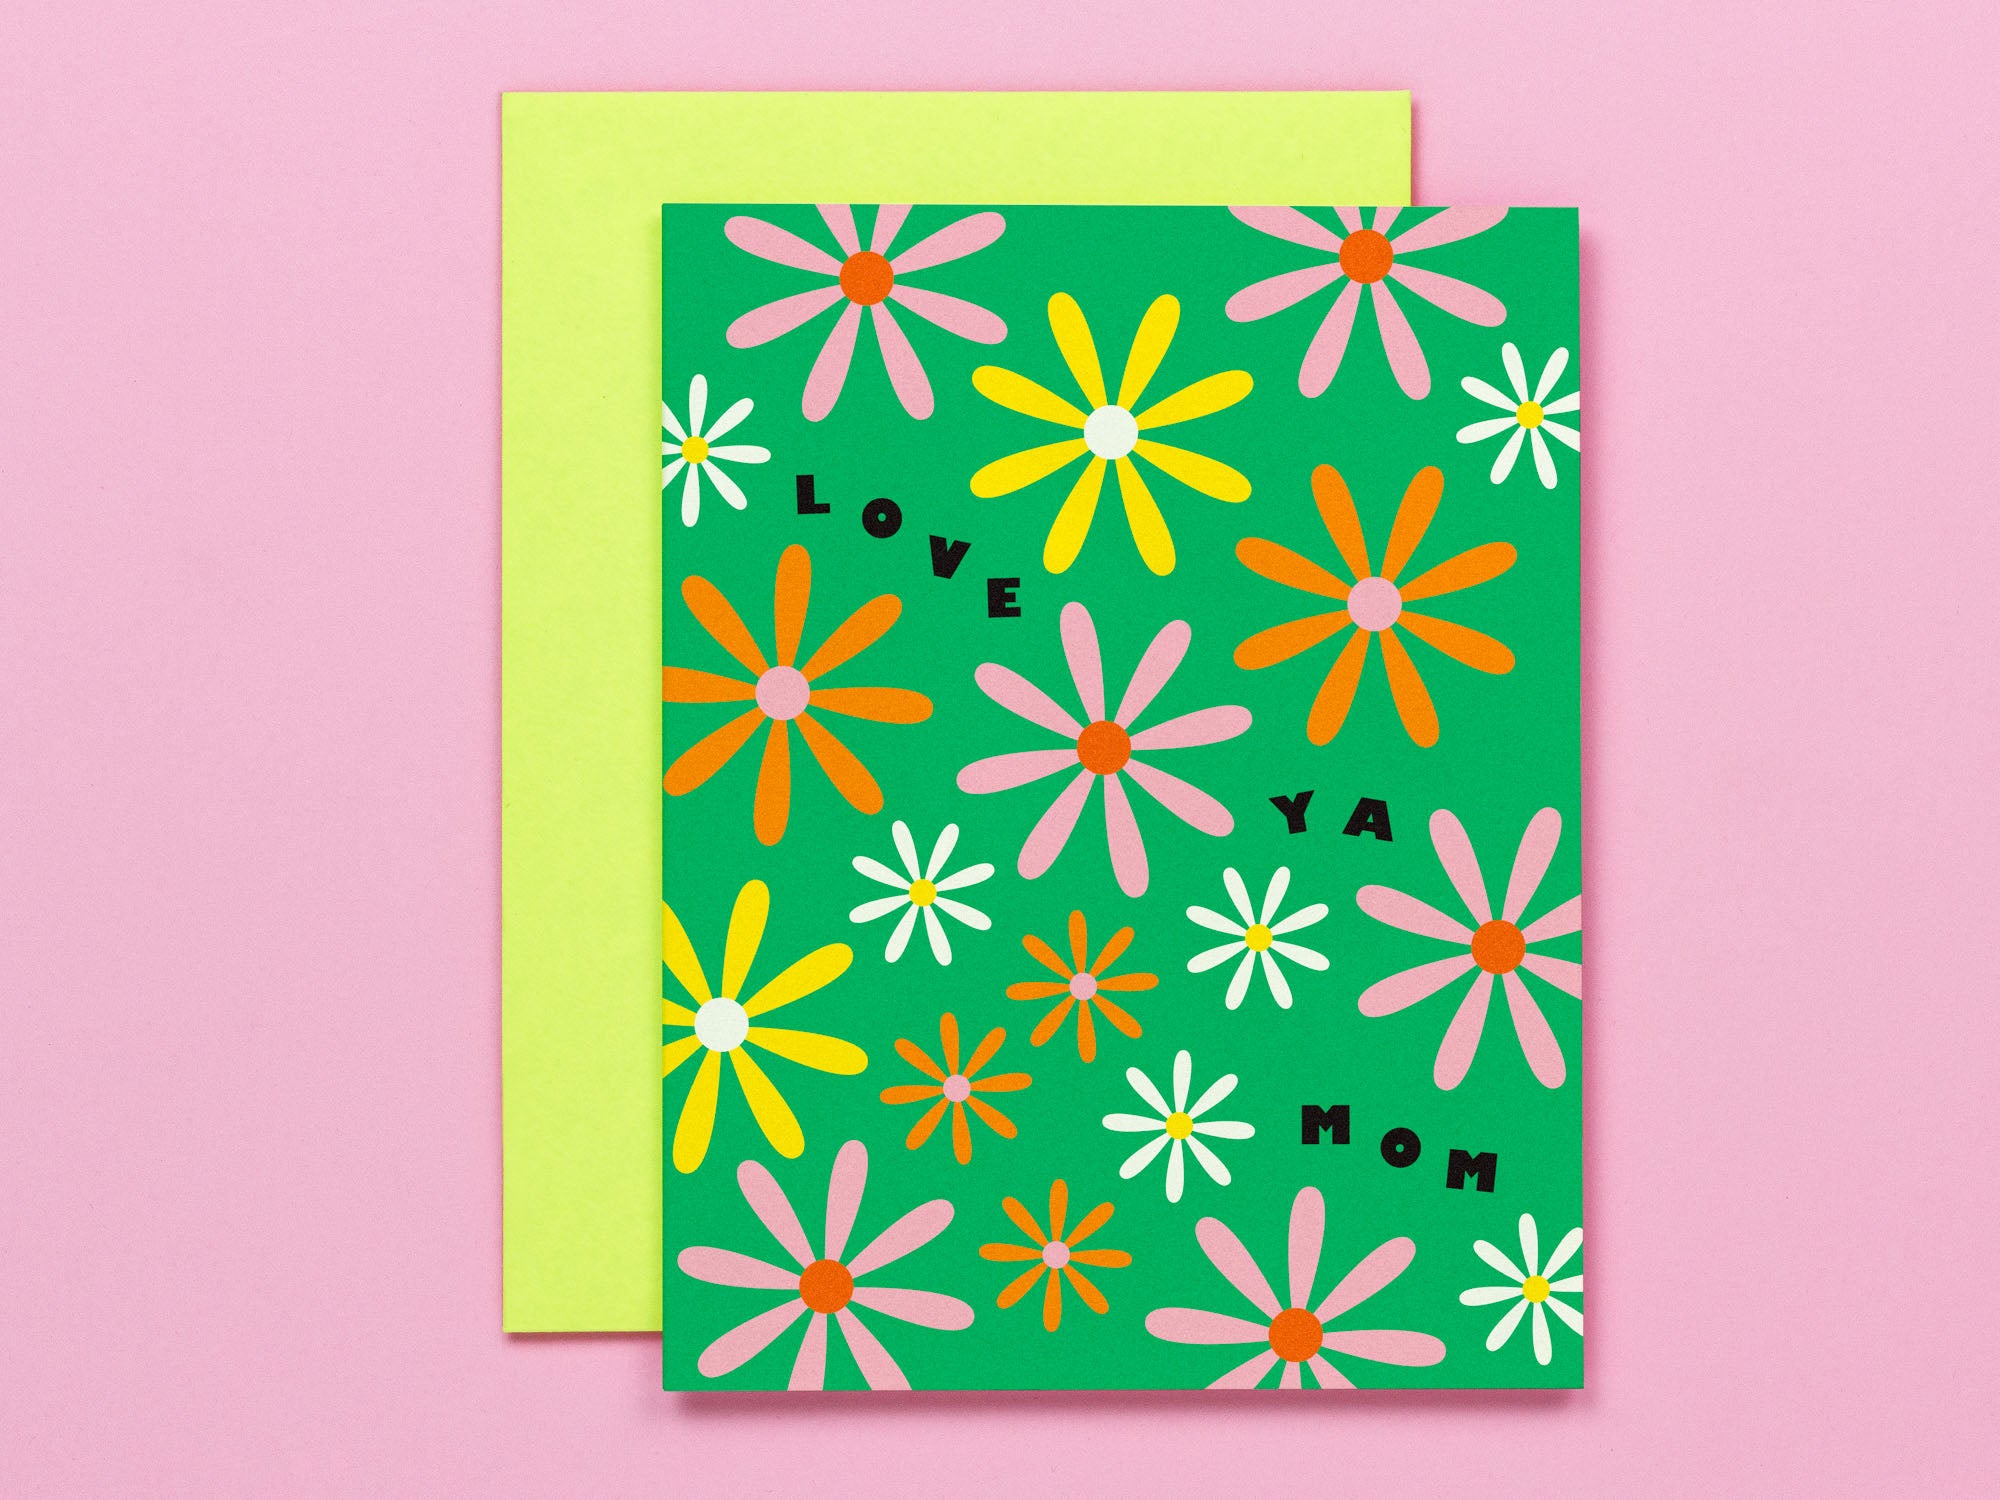 Love Ya Mom Daisies Mother's Day Card Floral Greeting Card • Made in USA by My Darlin' @mydarlin_bk